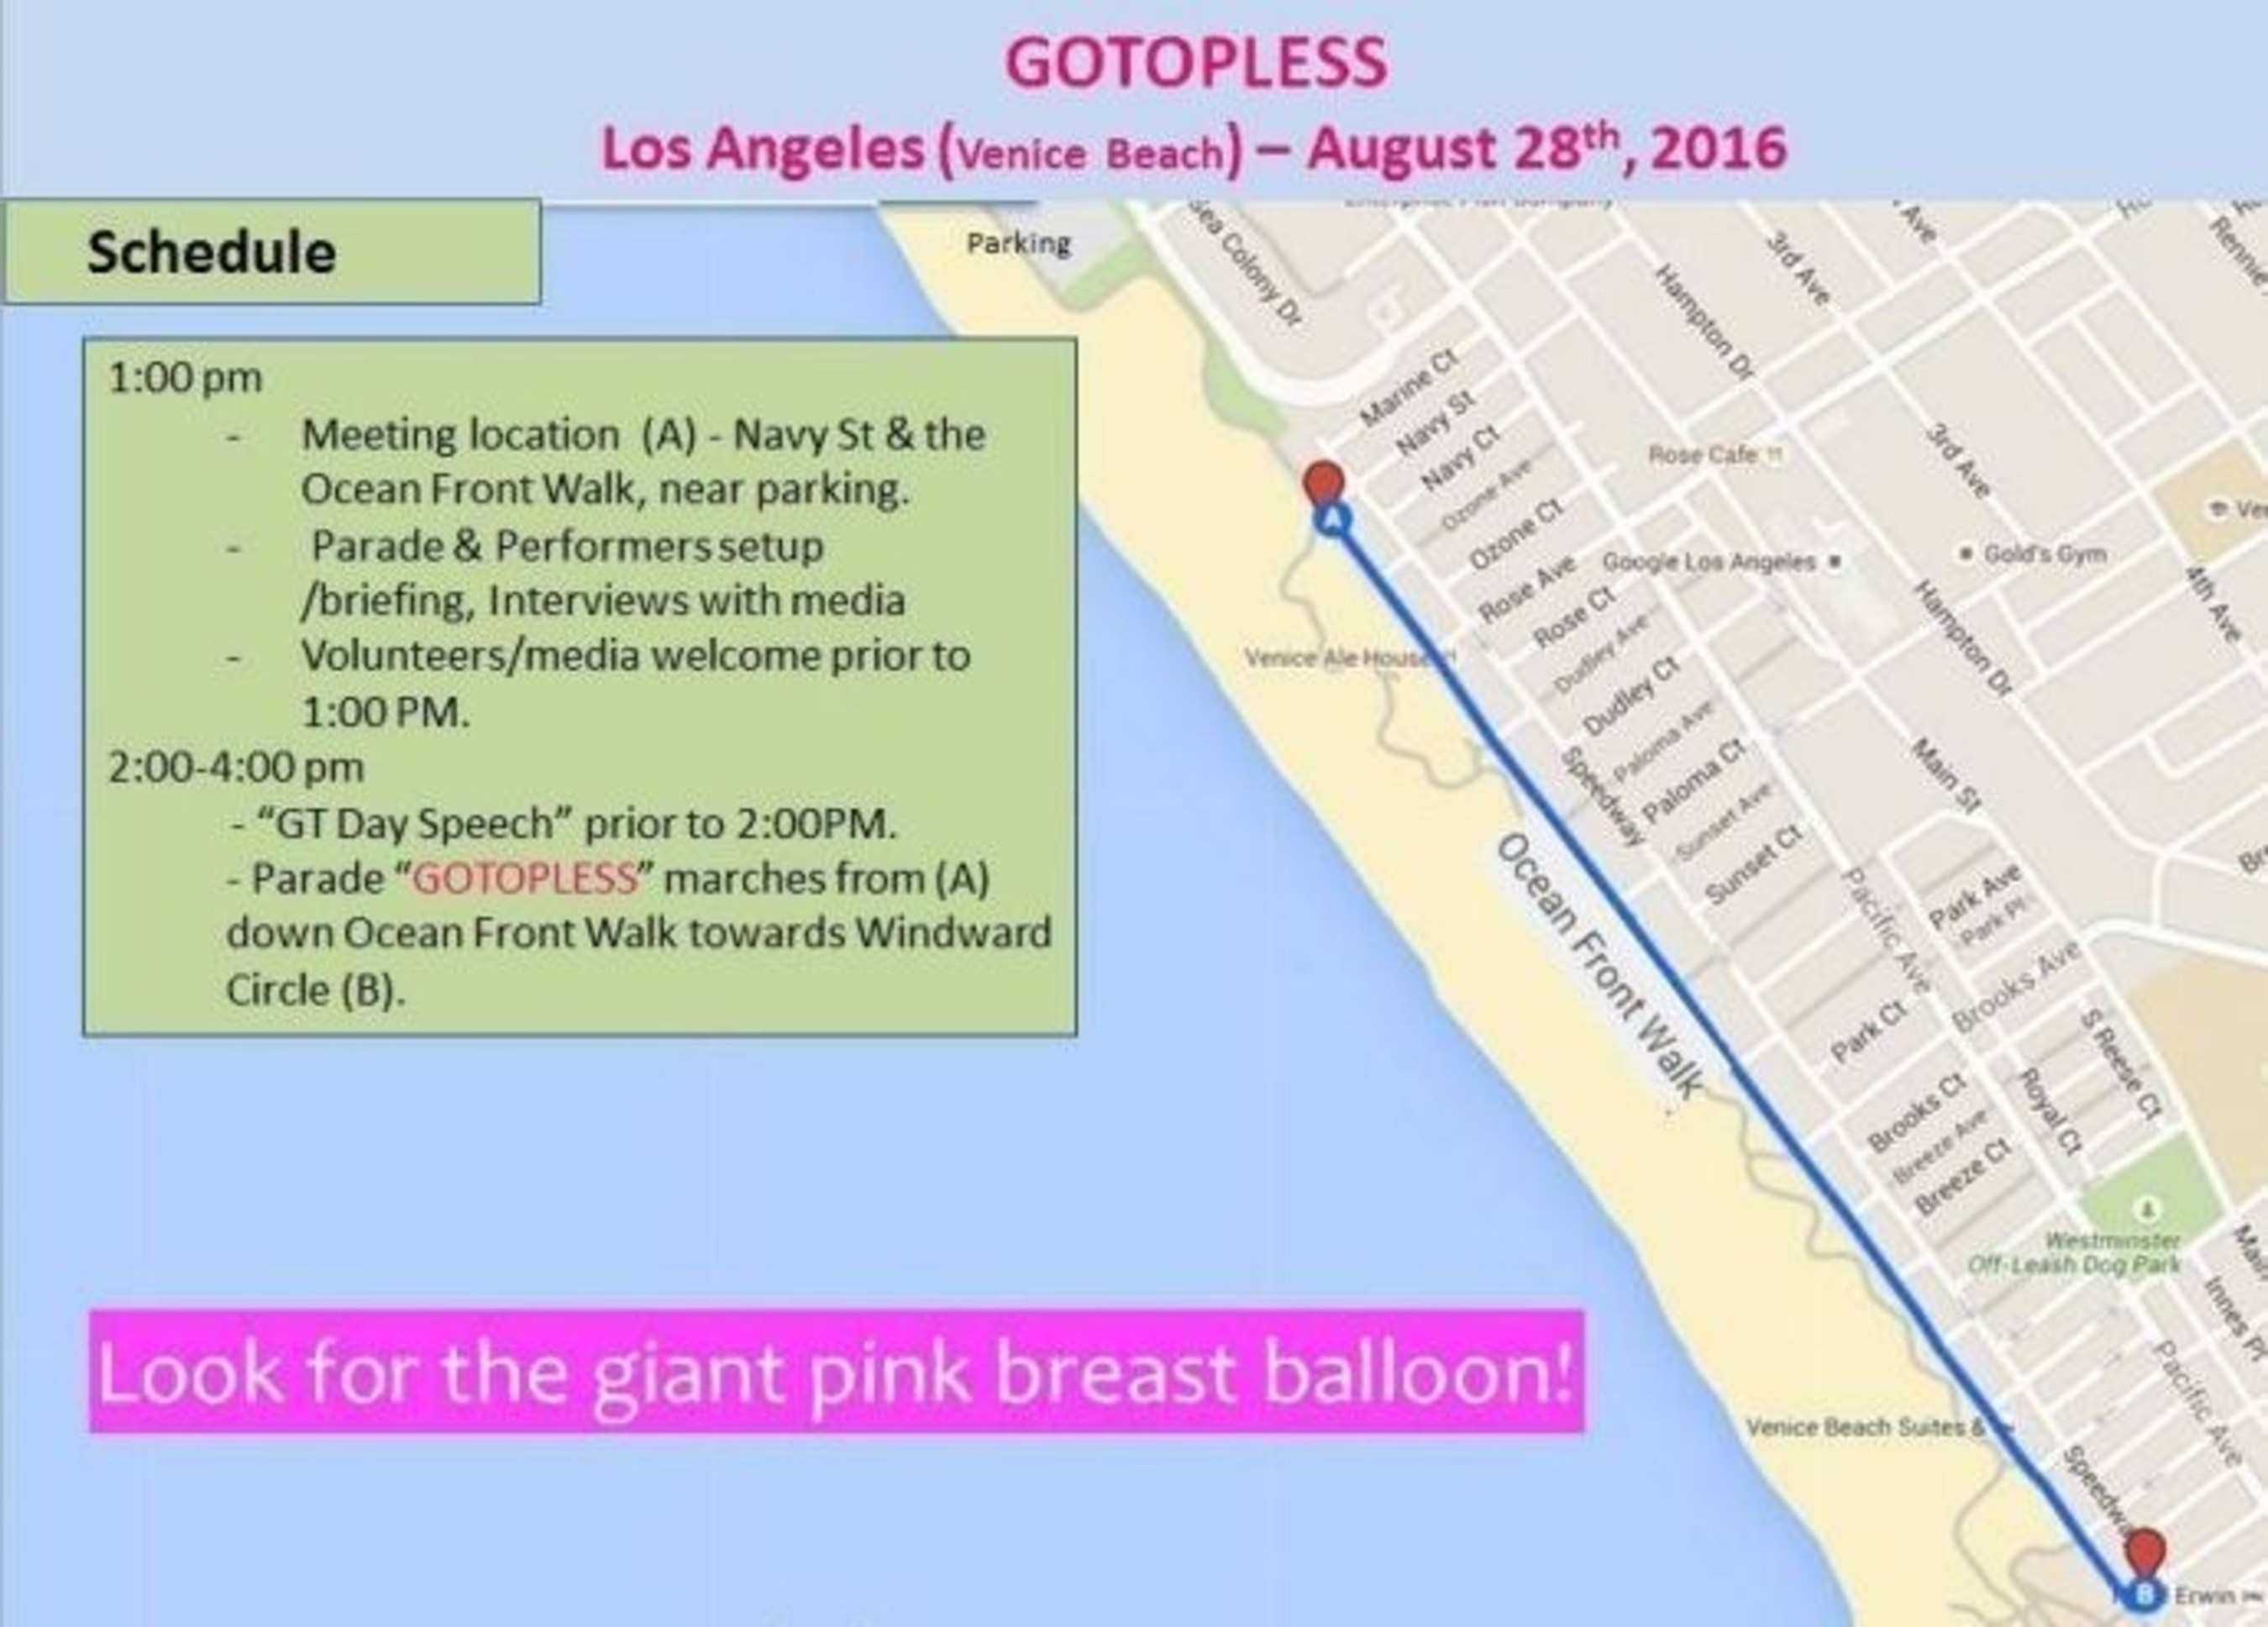 GoTopless Pride Parade in Venice Beach, CA to mark 9th Annual GoTopless Day on Aug. 28